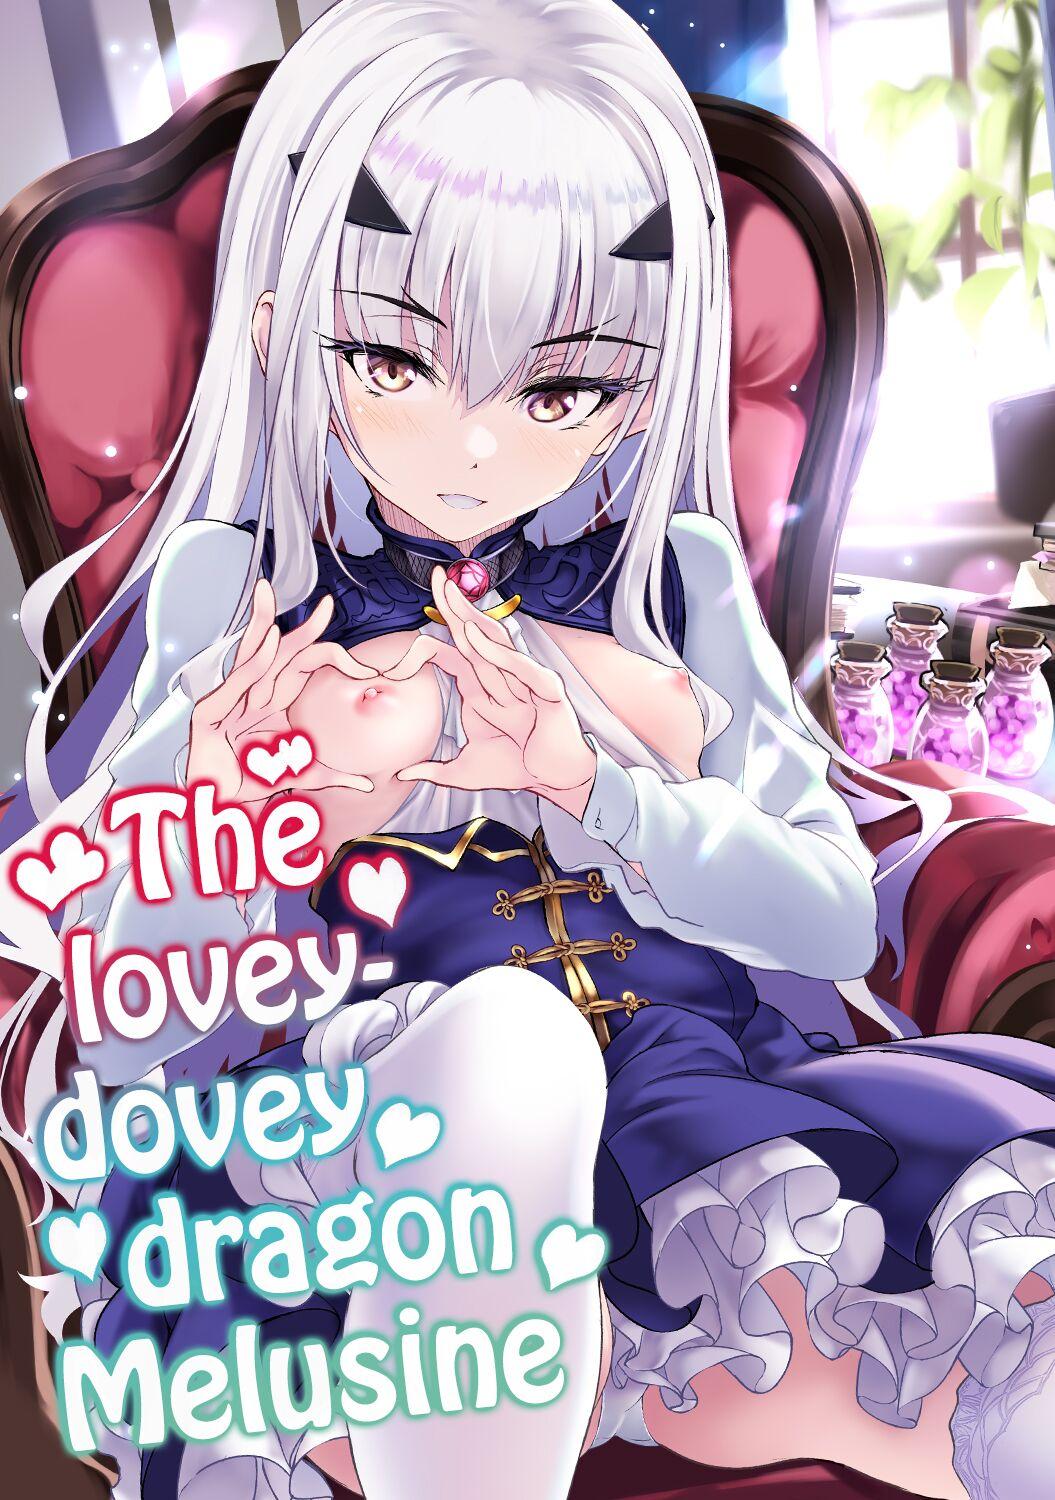 Bed Ichaicha Dragon Melusine | The lovey-dovey dragon Melusine - Fate grand order Scandal - Picture 1